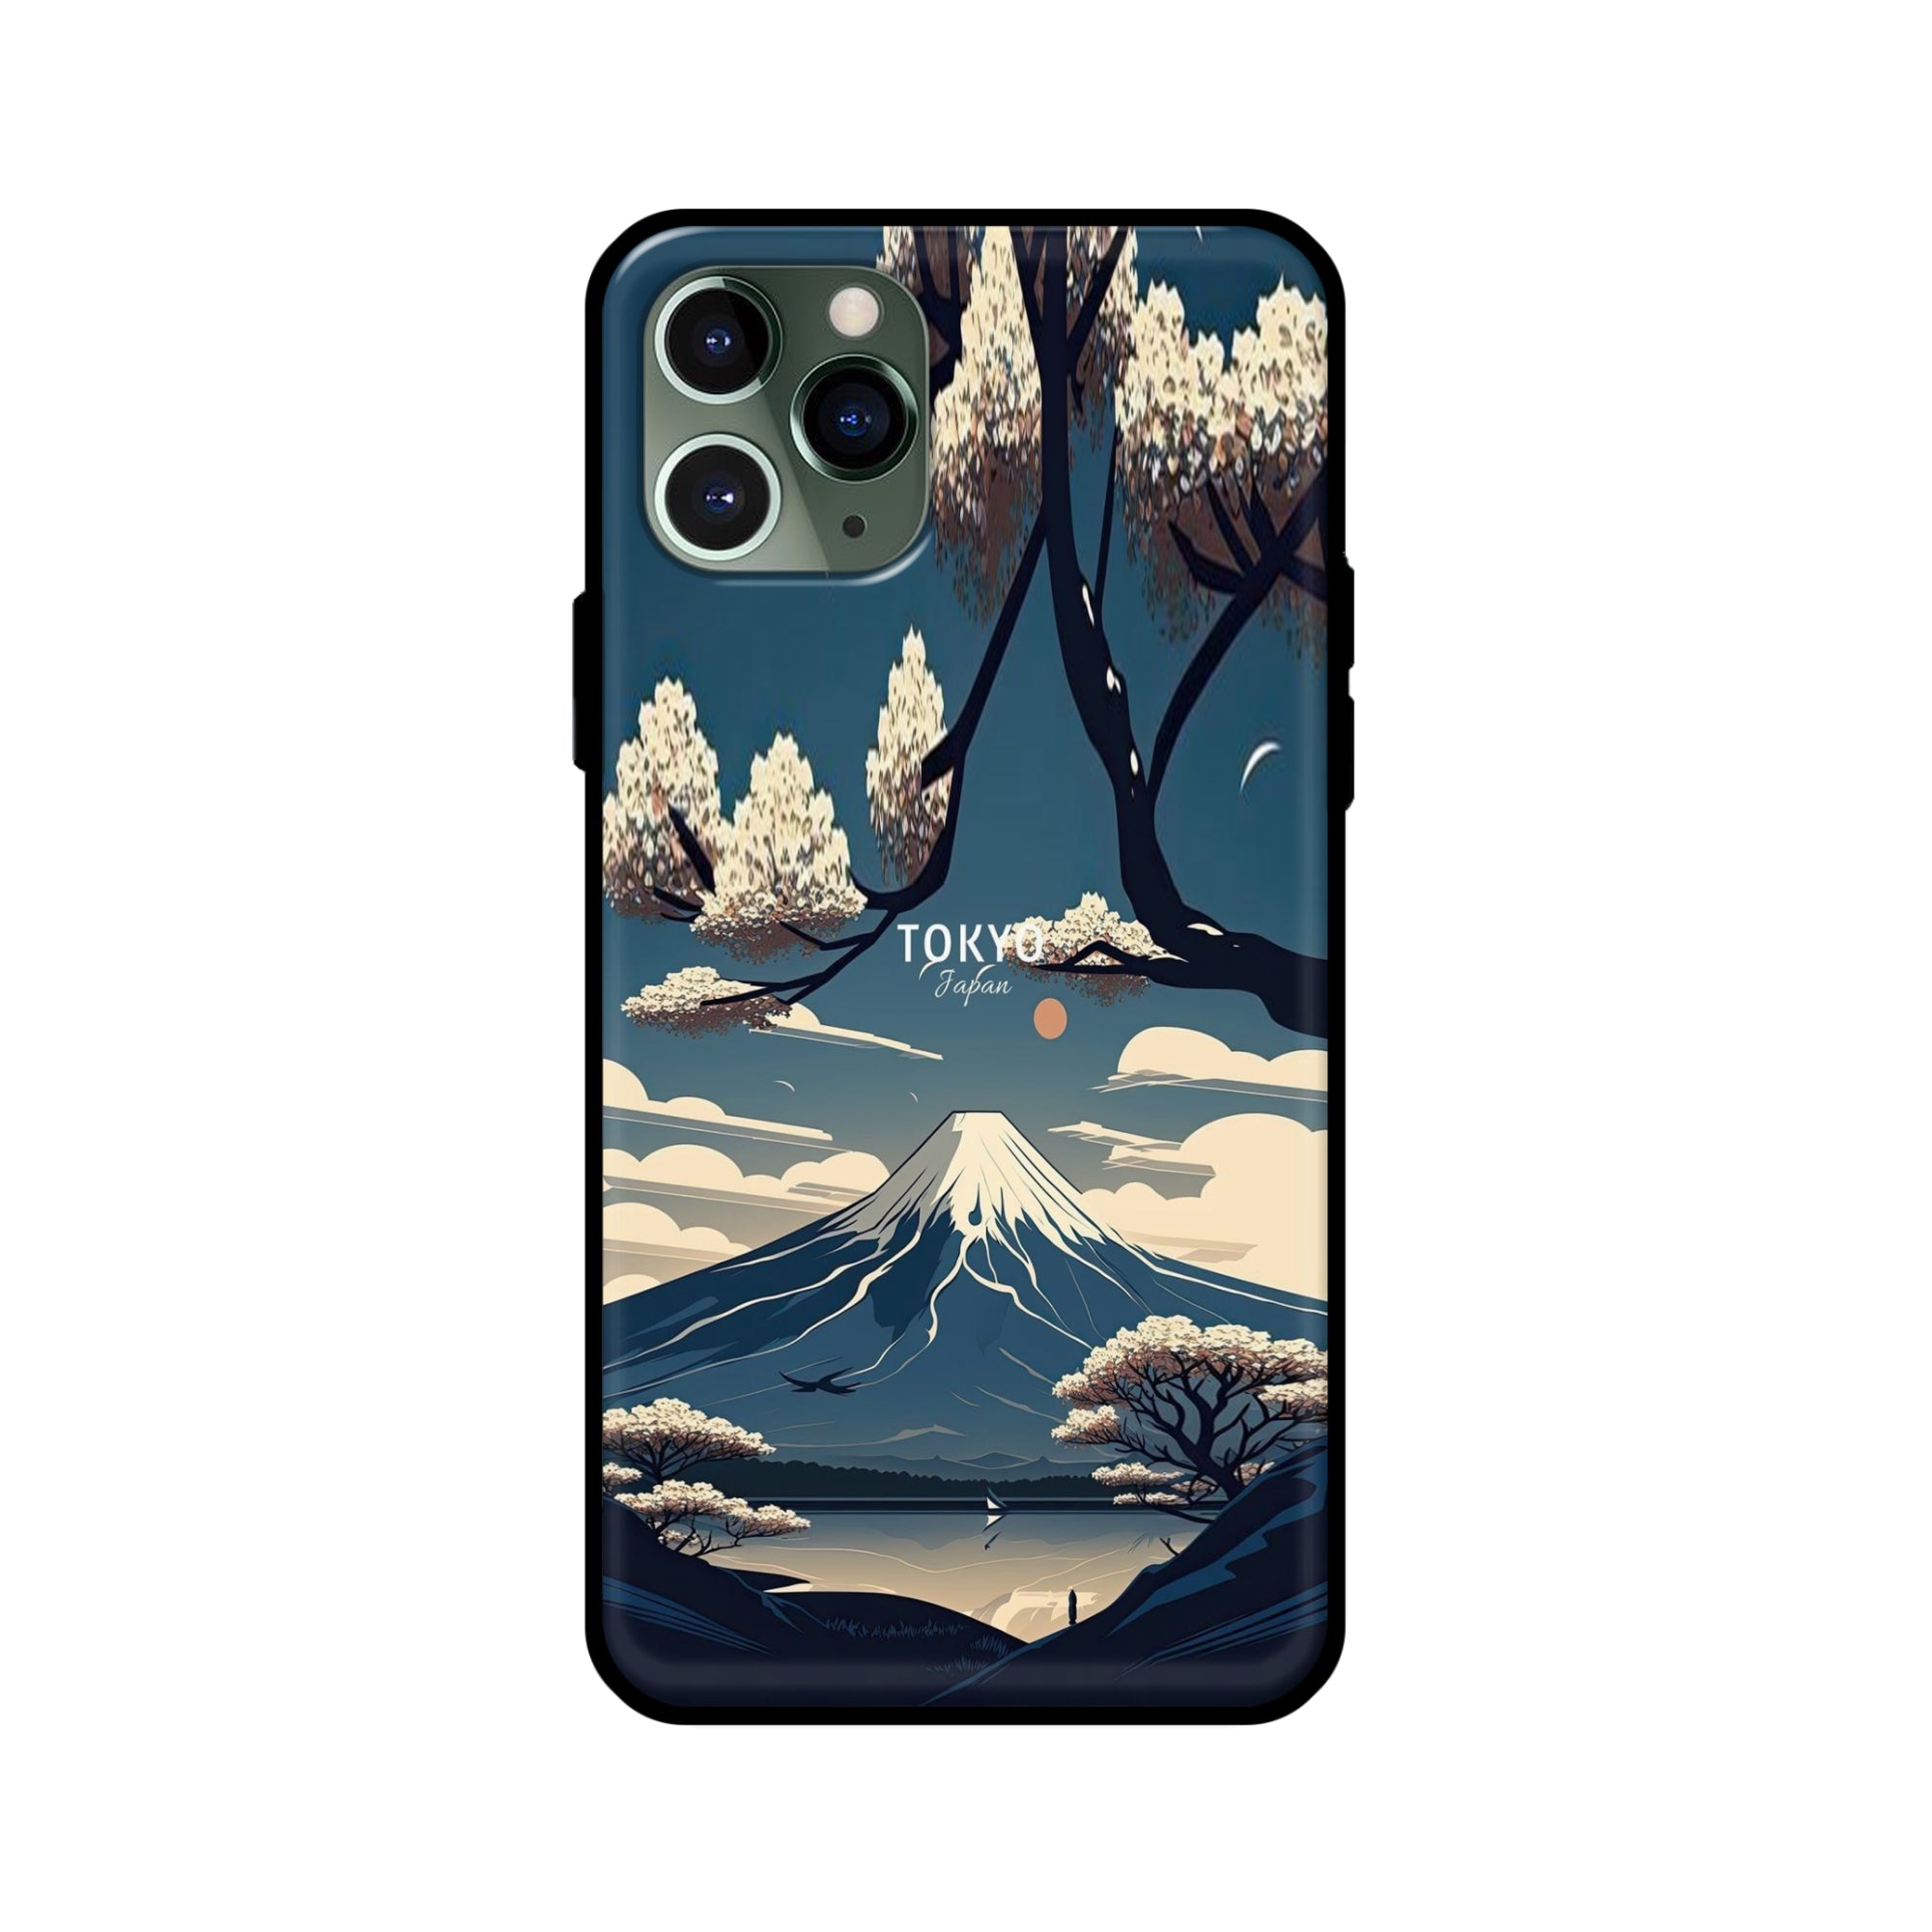 Buy Tokyo Glass/Metal Back Mobile Phone Case/Cover For iPhone 11 Pro Online